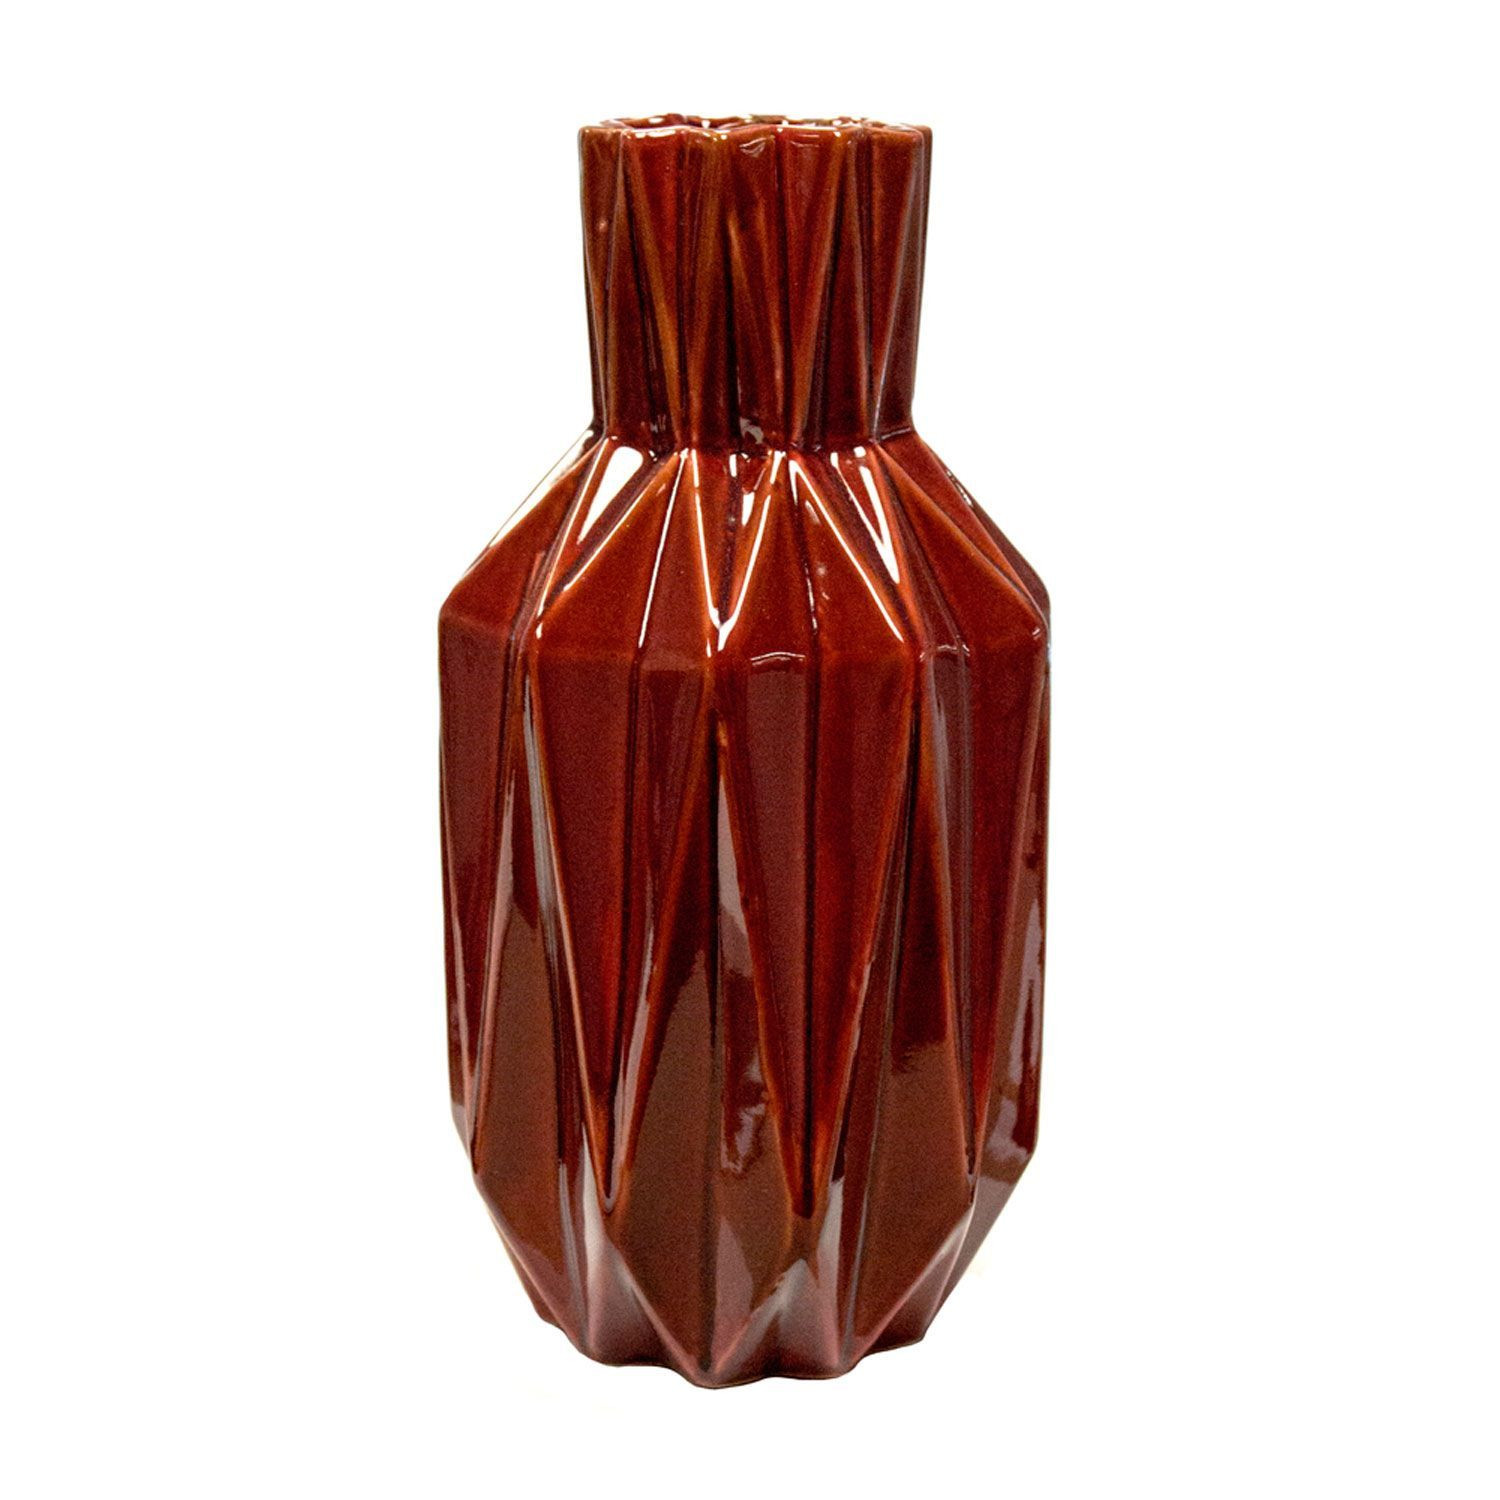 26 Fabulous Pier 1 Glass Vase 2024 free download pier 1 glass vase of 36 tall red floor vase the weekly world with 36 tall red floor vase